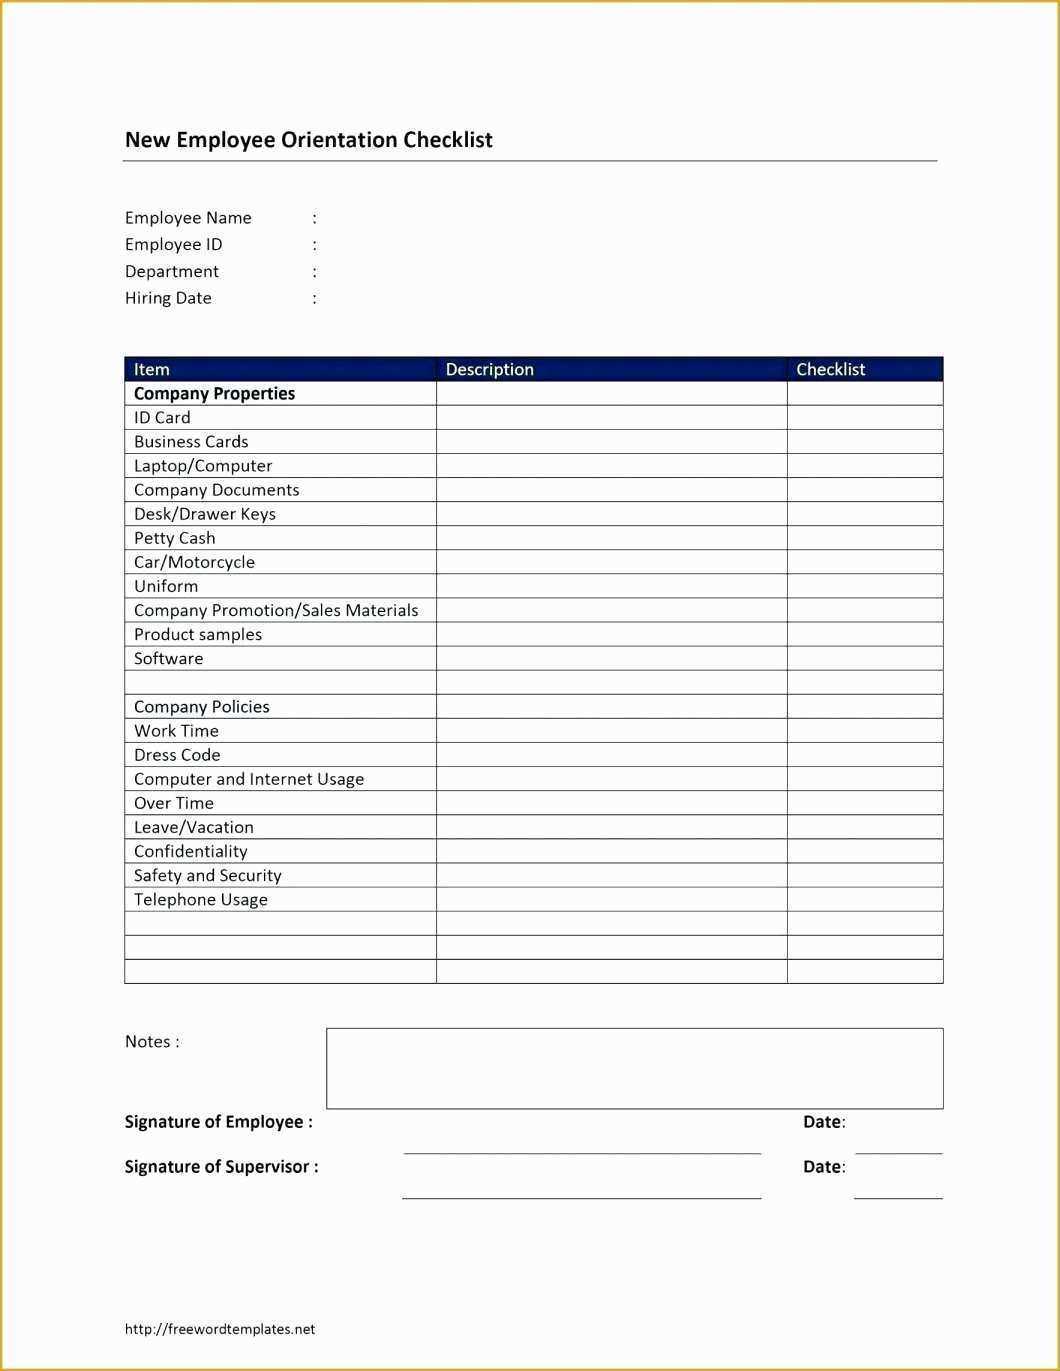 Report Card Template 020 High Free 20Report Cards Deped With High School Report Card Template